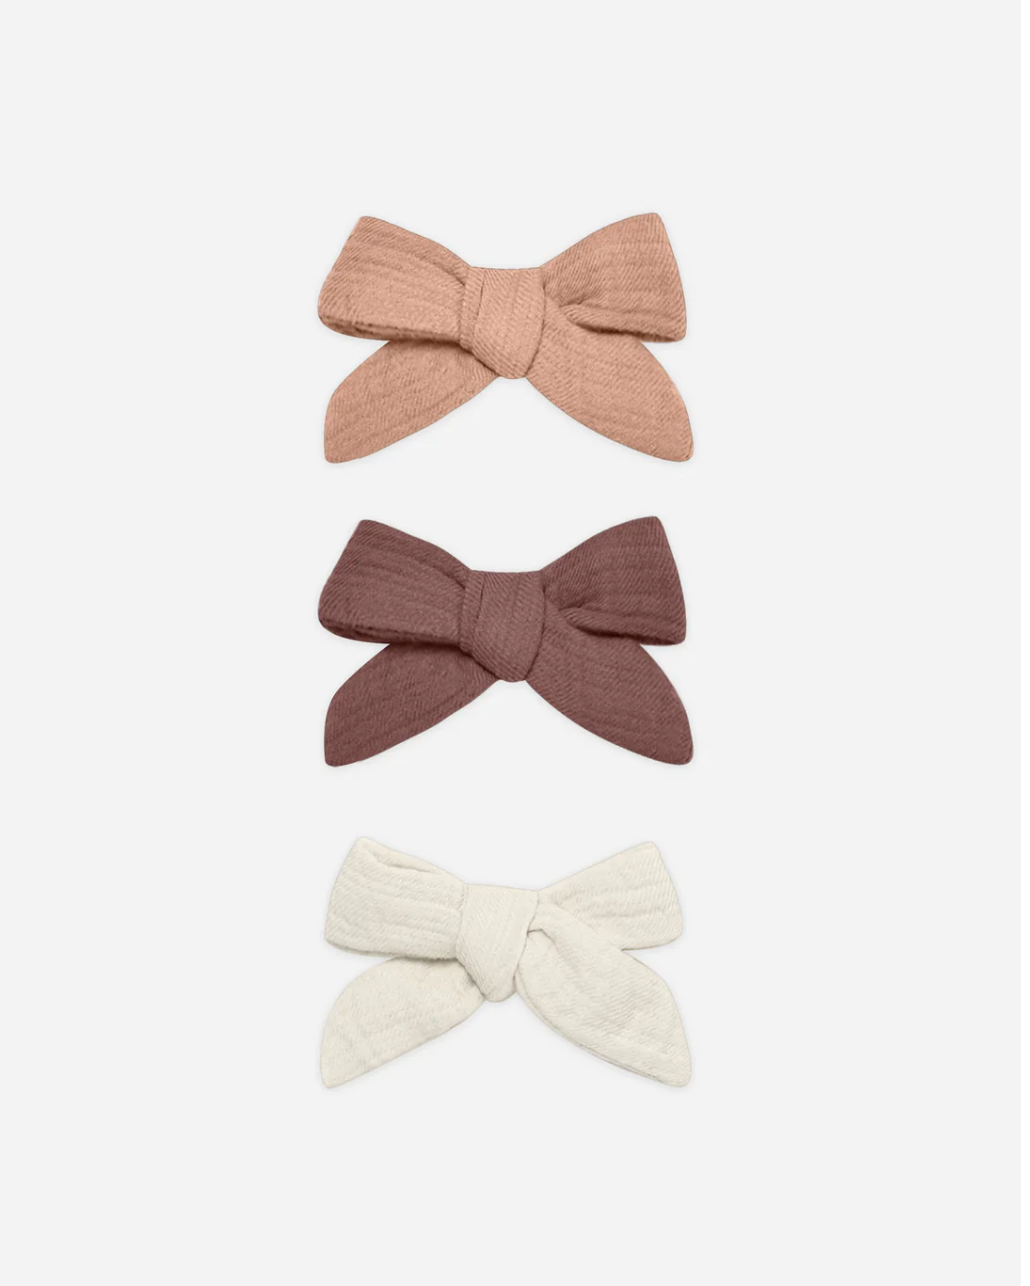 Bow with Clip set of 3 - Rose, Plum, Natural